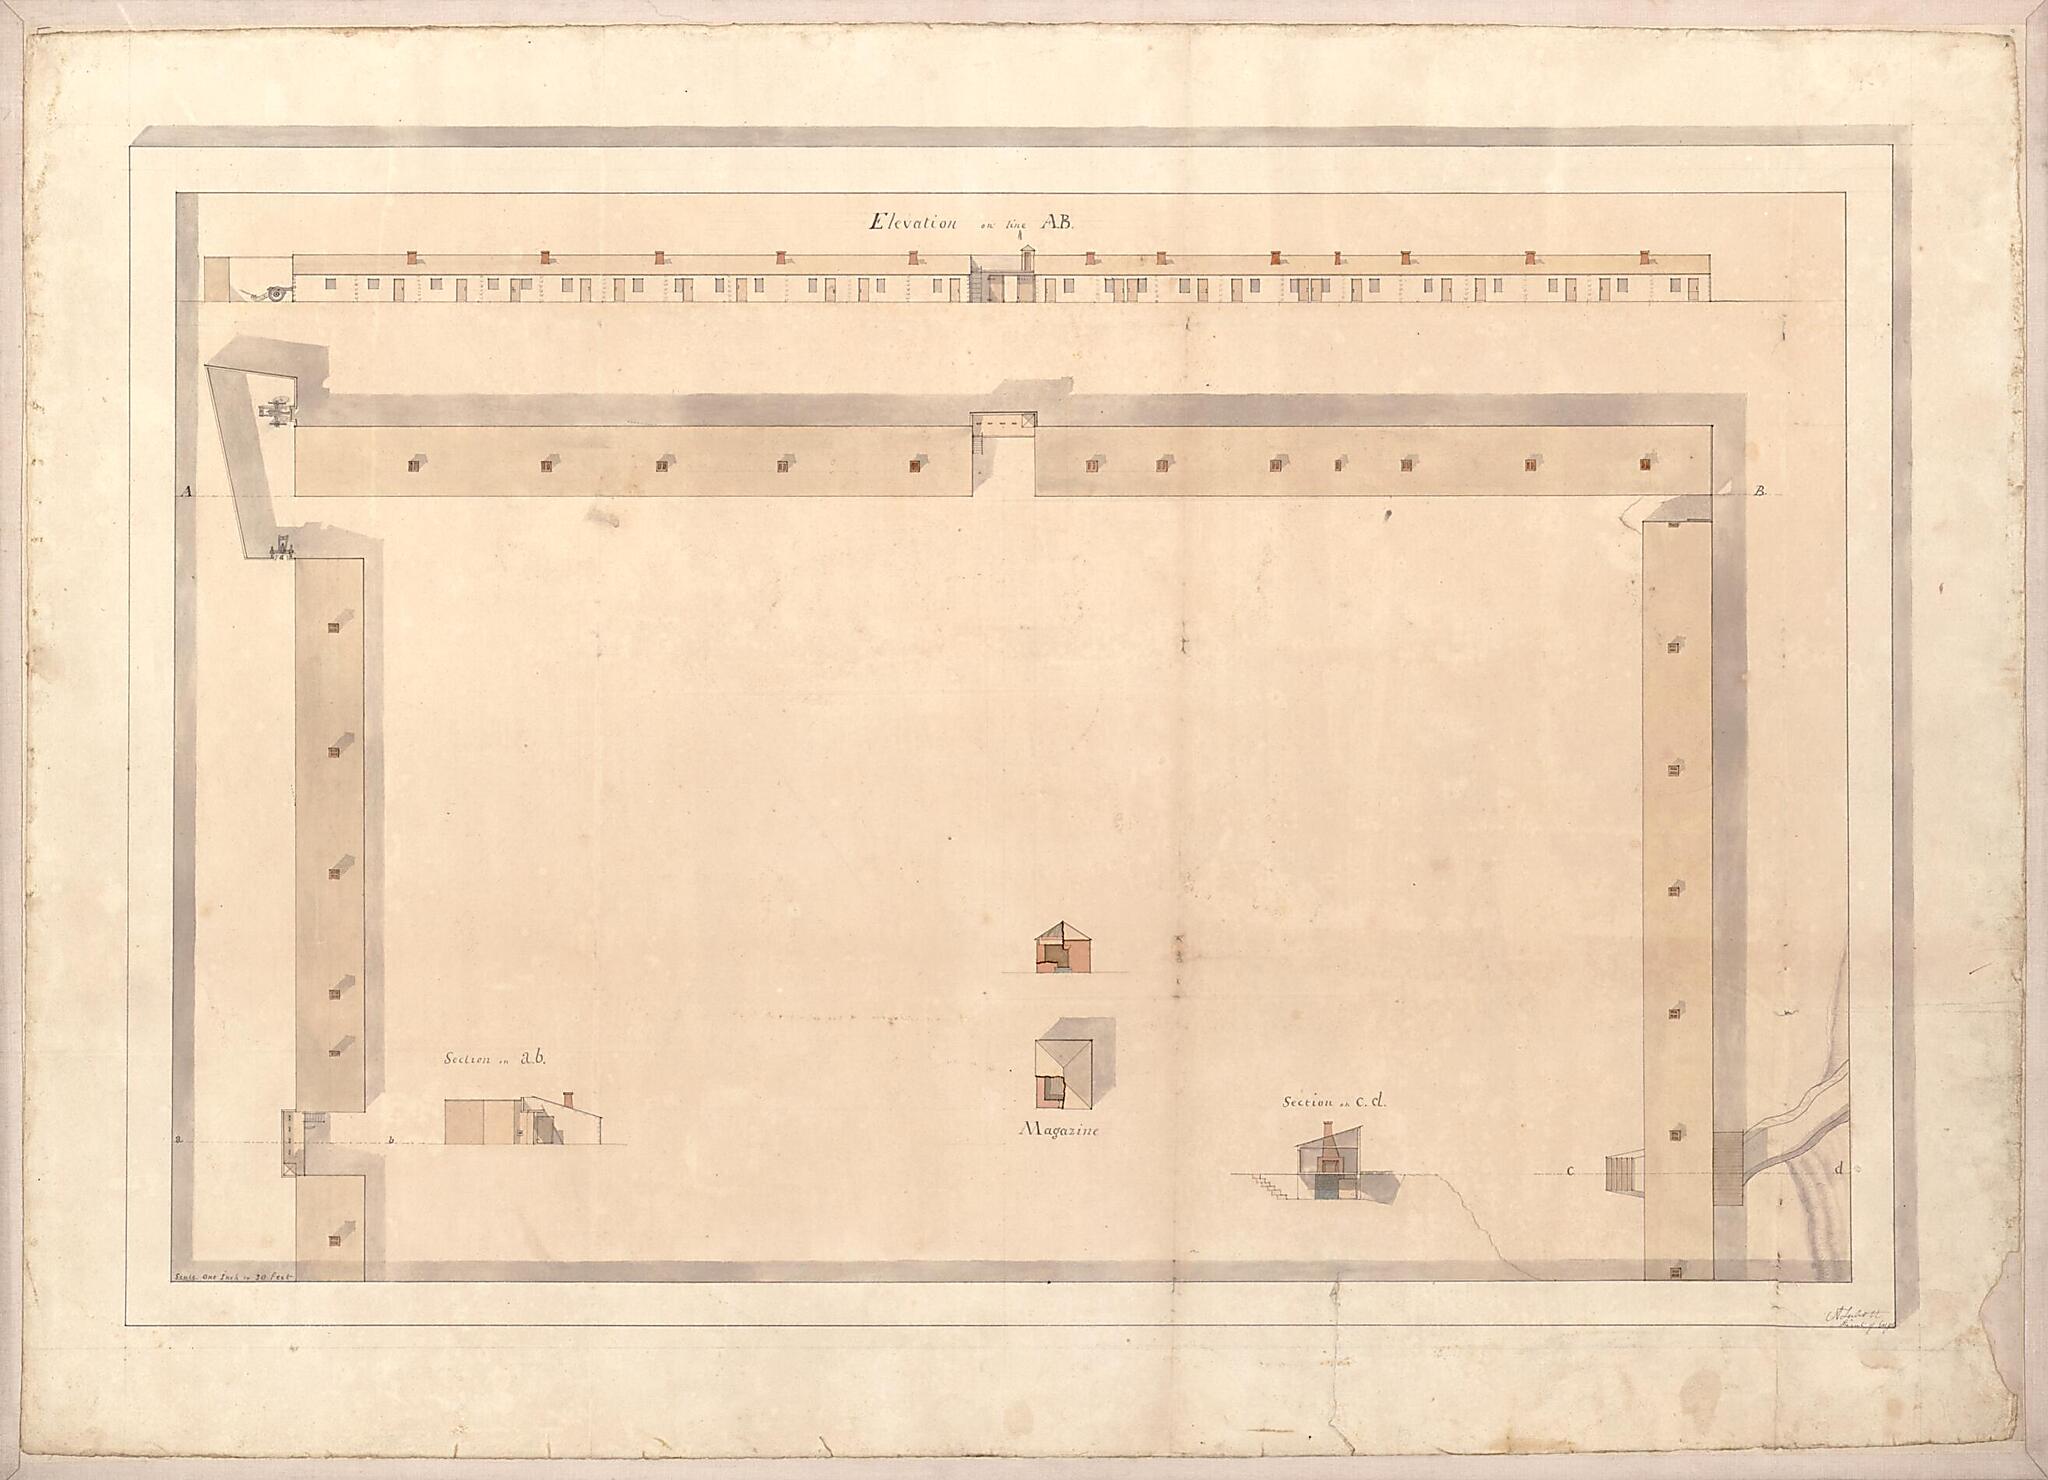 This old map of Plan of Fort Atkinson, Nebraska. (Defence sic at St. Louis) from 1819 was created by Andrew Talcott in 1819